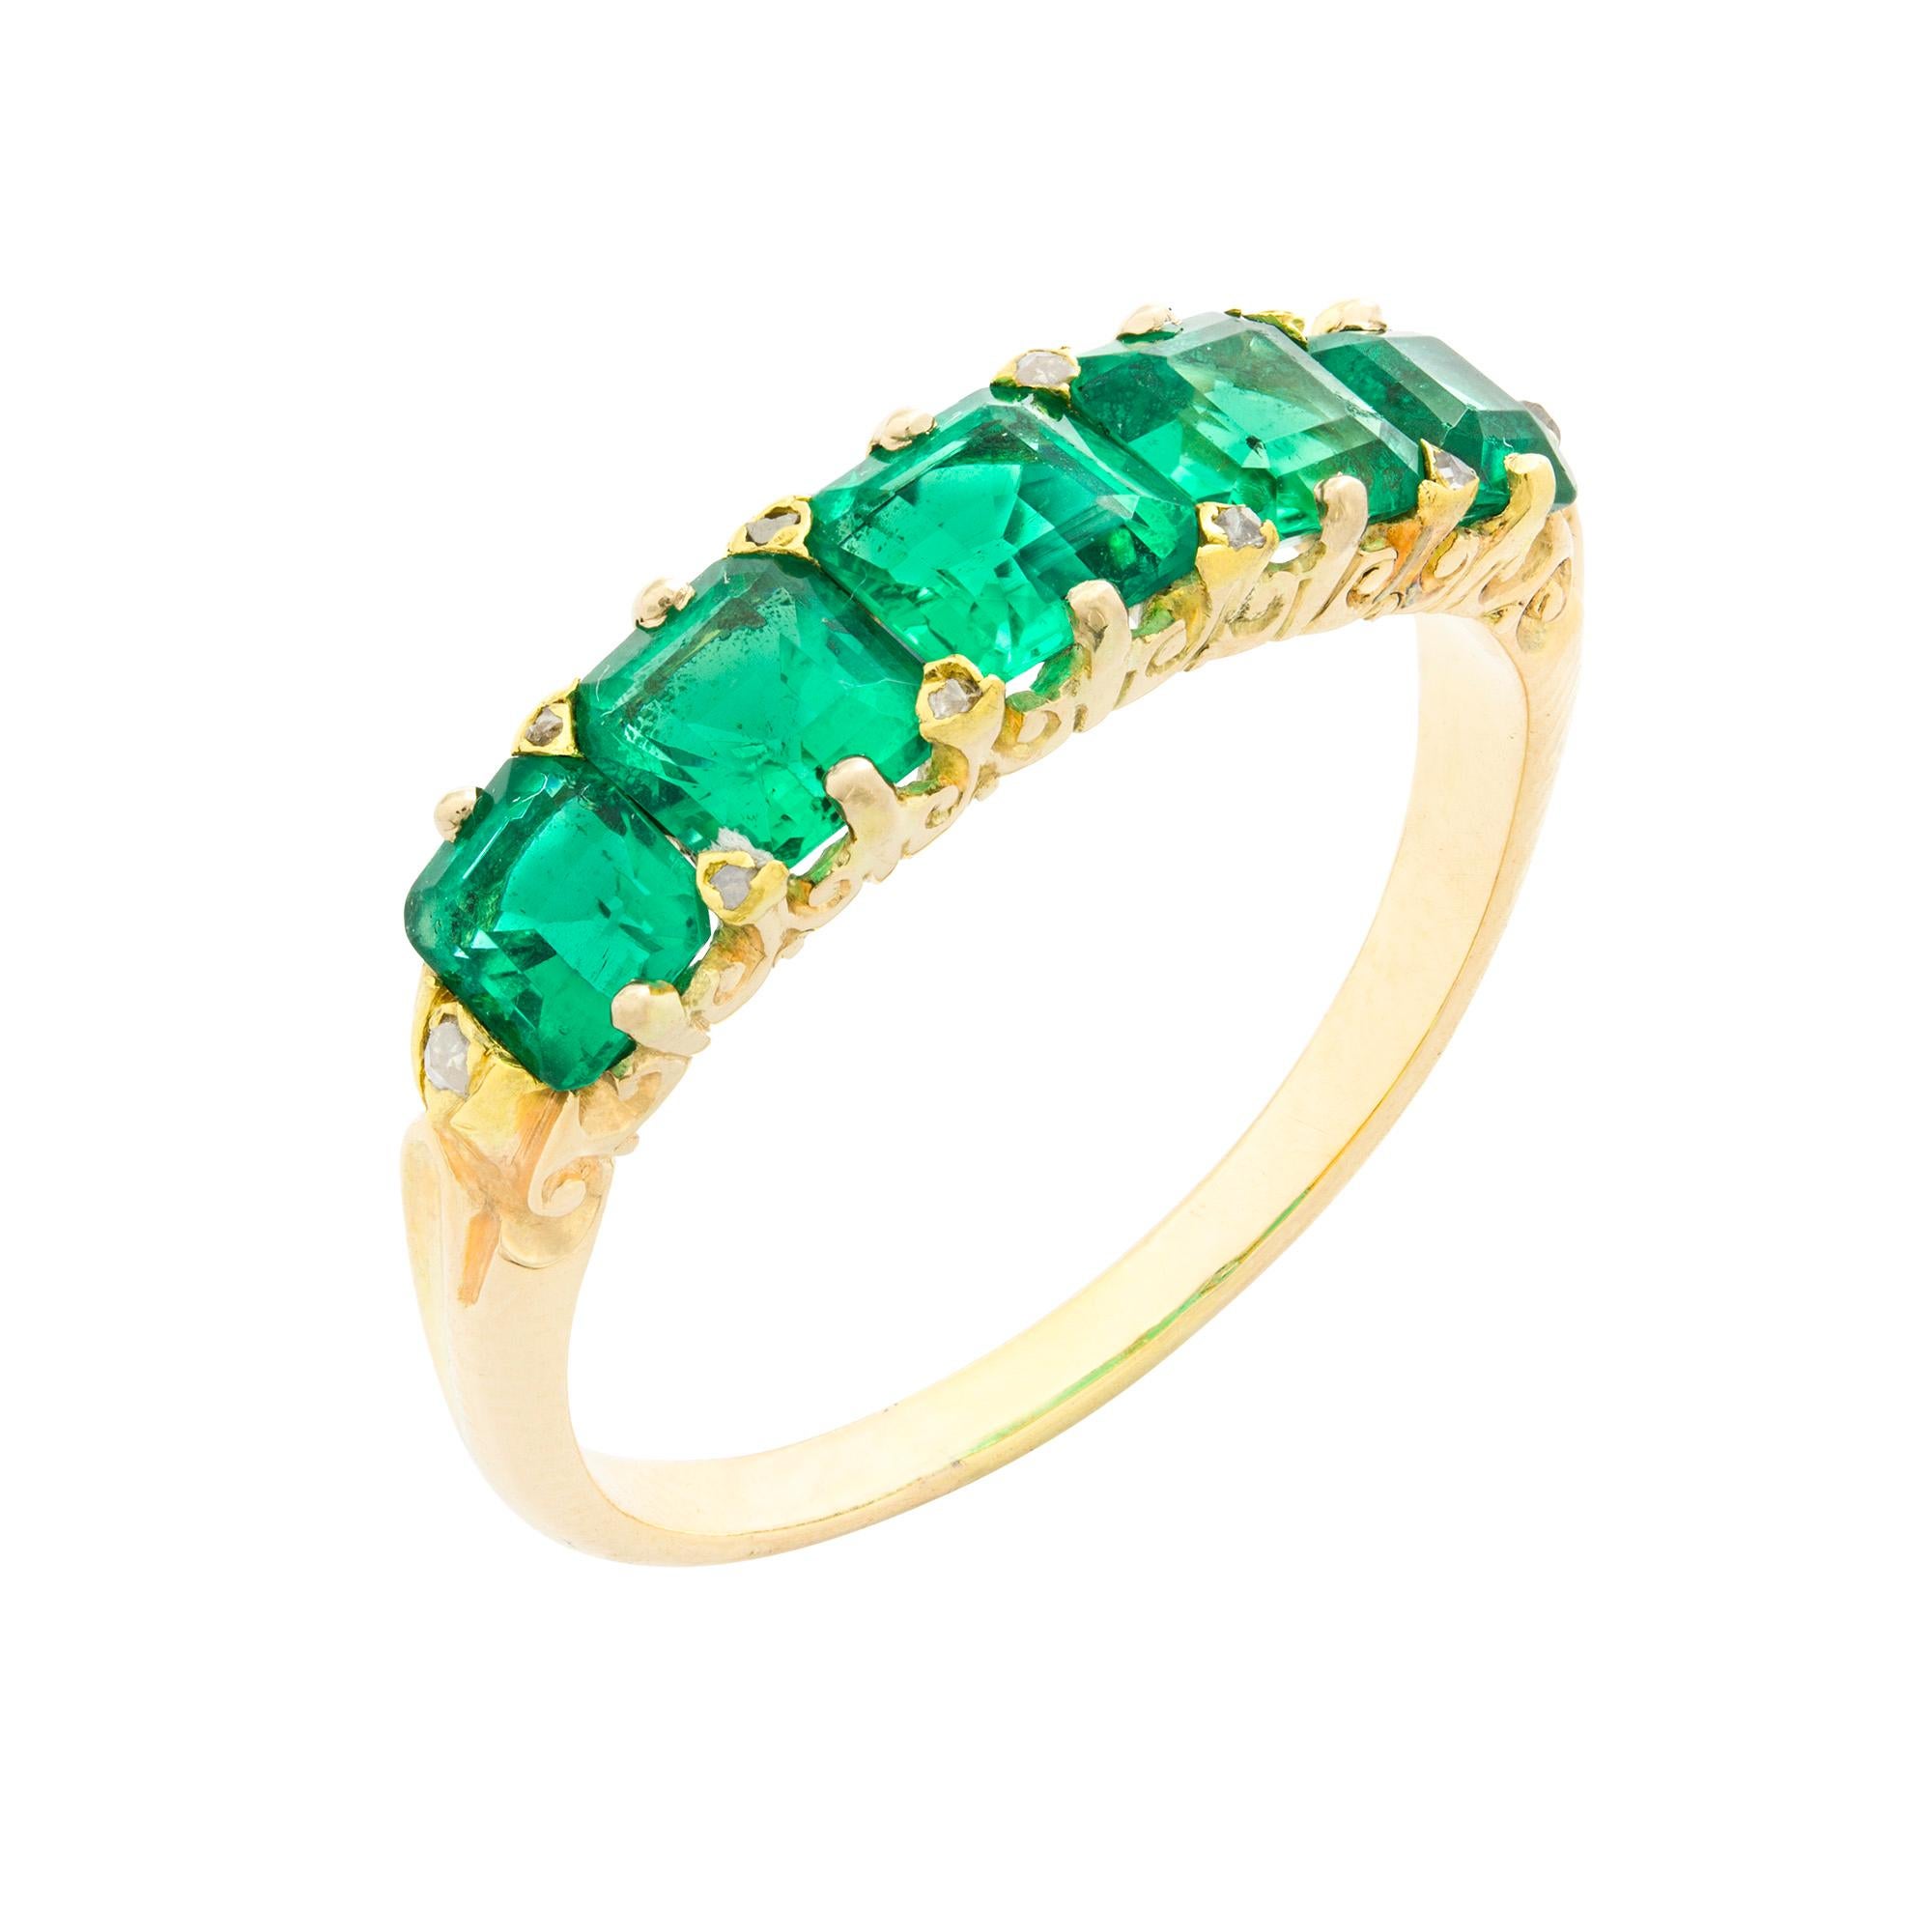 A Victorian five-stone carved half hoop emerald ring, the five emerald-cut emeralds estimated to weigh a total of 1.80 carats, graduating in size from the centre with two rose-cut diamonds set between each, all claw-set to a yellow gold carved half